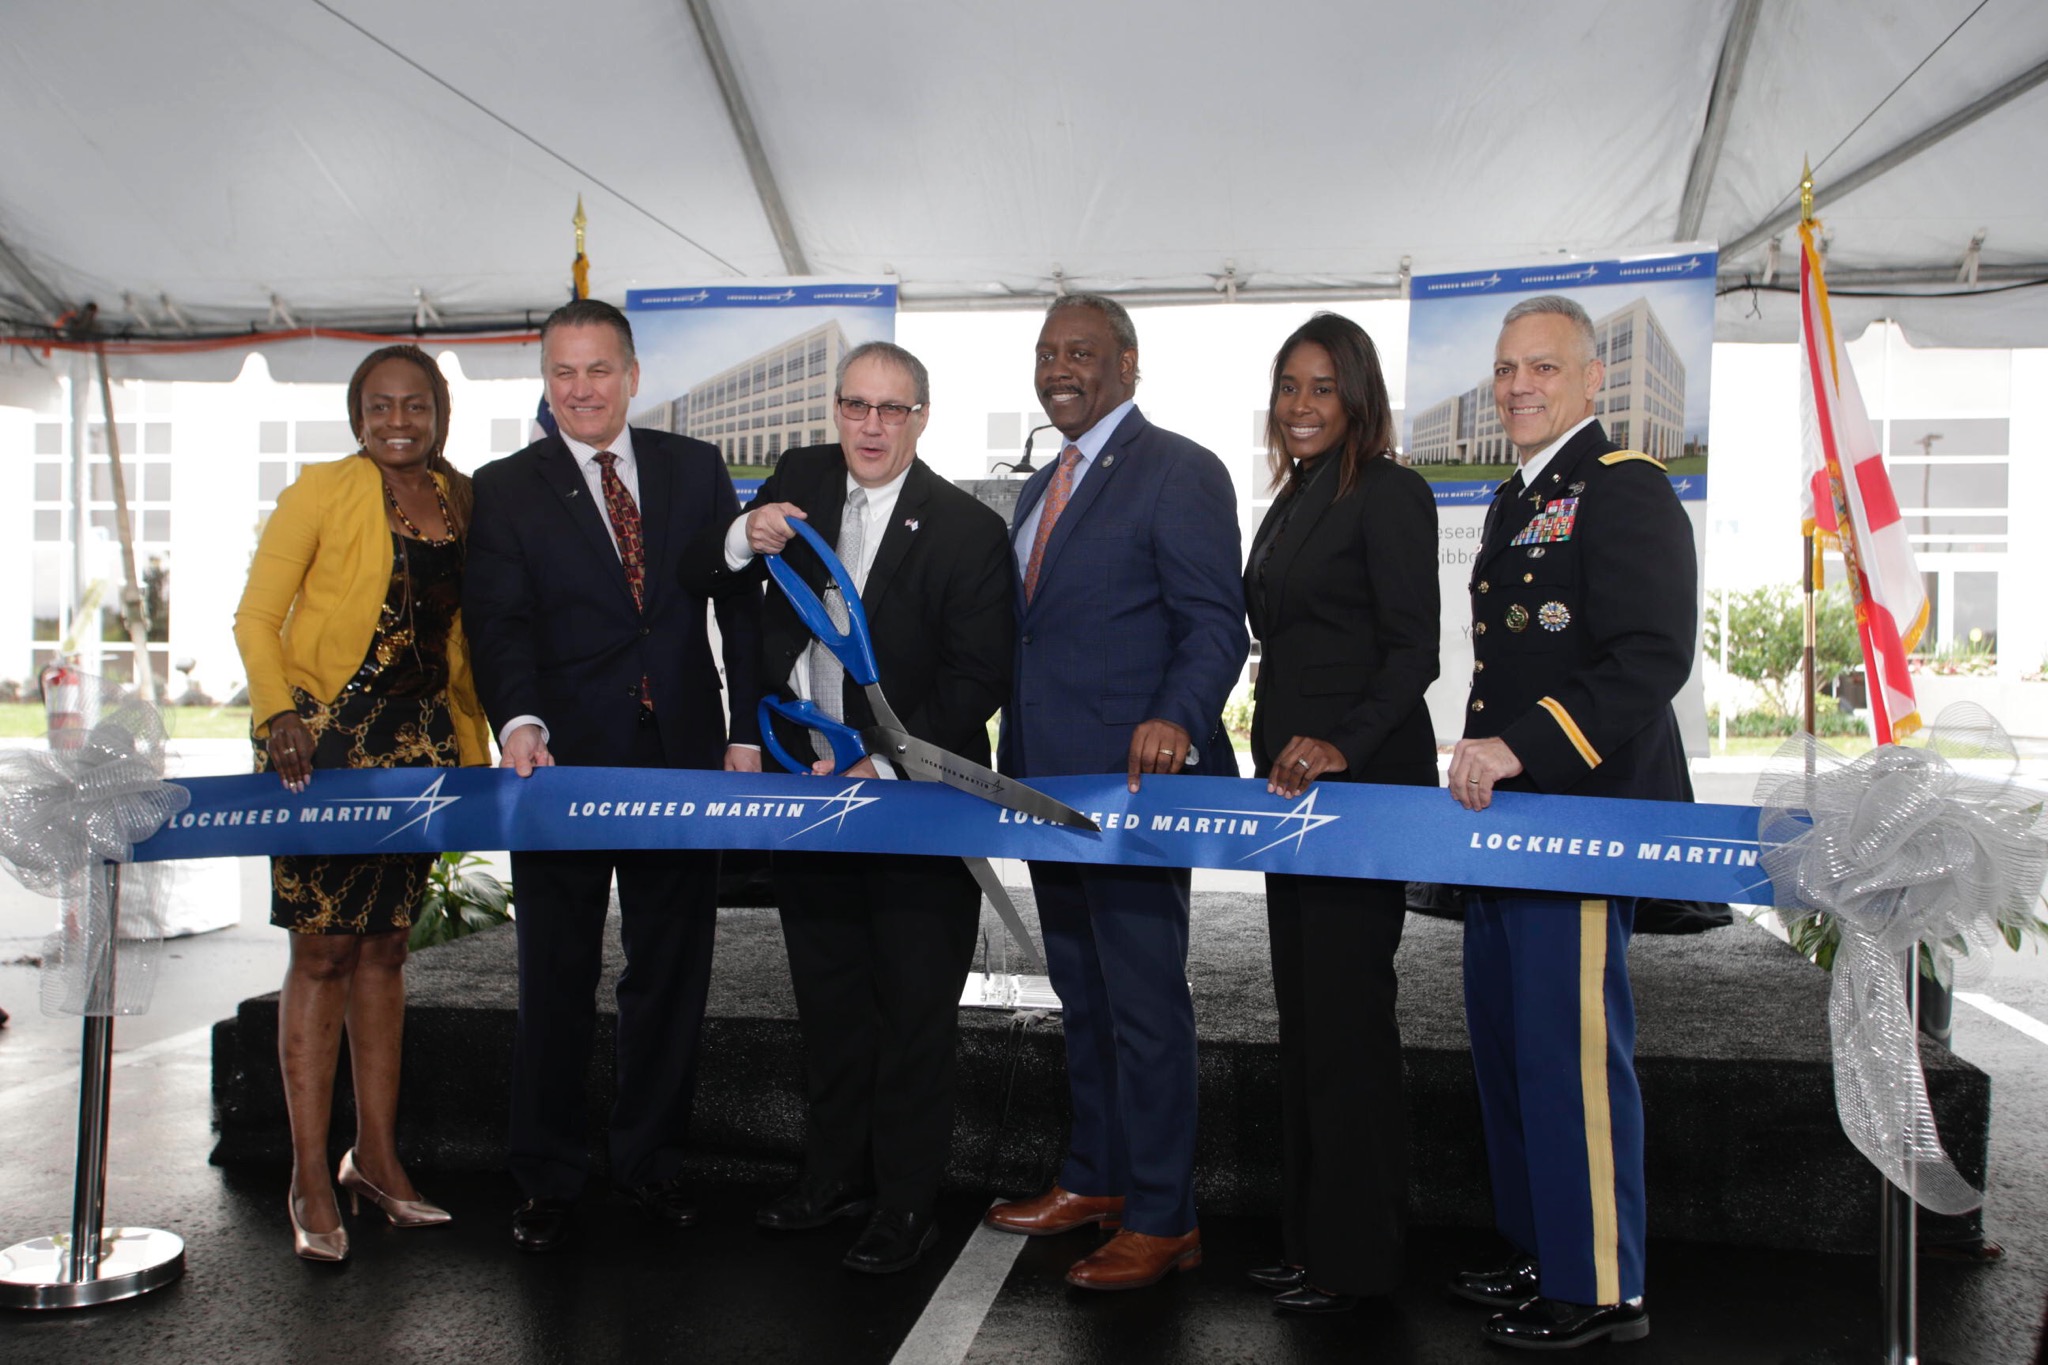 Orange County Mayor Jerry Demings joins five other community leaders and Lockheed Martin executives to cut the commemorative ribbon for Lockheed Martin's Research & Development II facility.